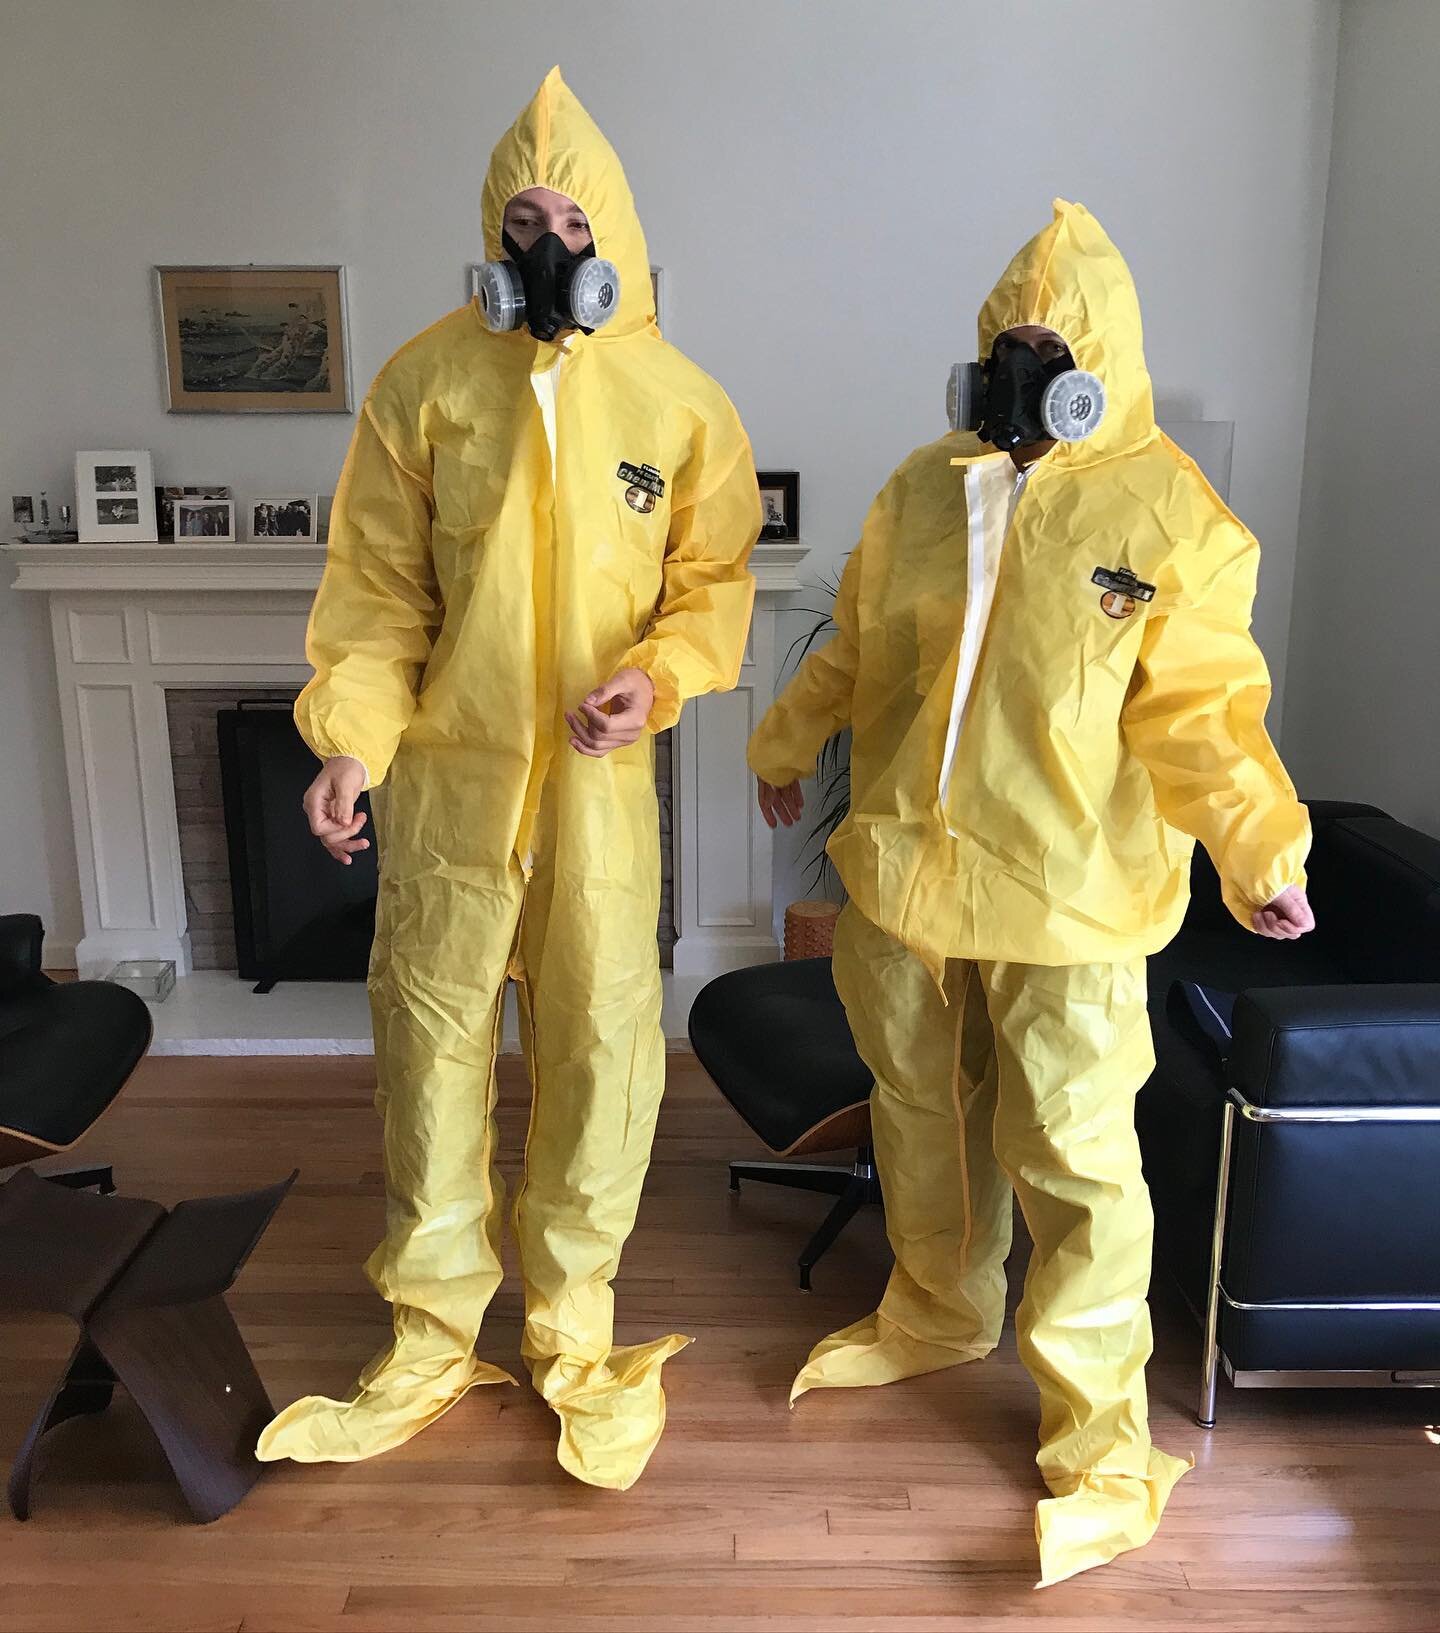 I wanted to be Breaking Bad last Halloween and everyone told me &lsquo;no it&rsquo;s outdated irrelevant stupid idea don&rsquo;t bother.&rsquo; Who&rsquo;s laughing now #stayinside